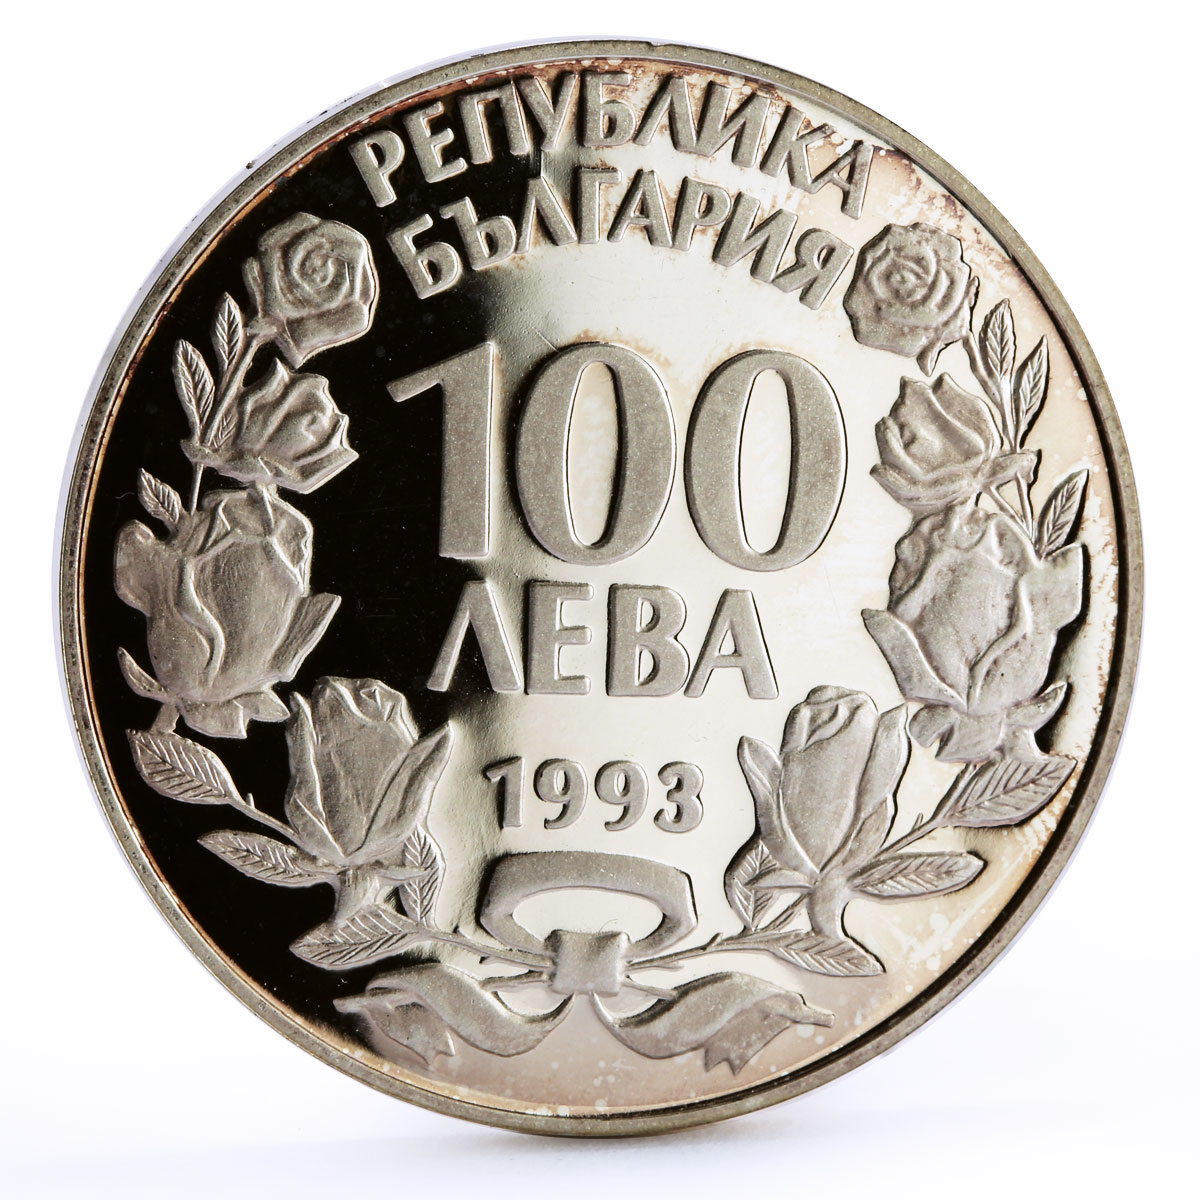 Bulgaria 100 leva Football World Cup in the USA Player proof silver coin 1993